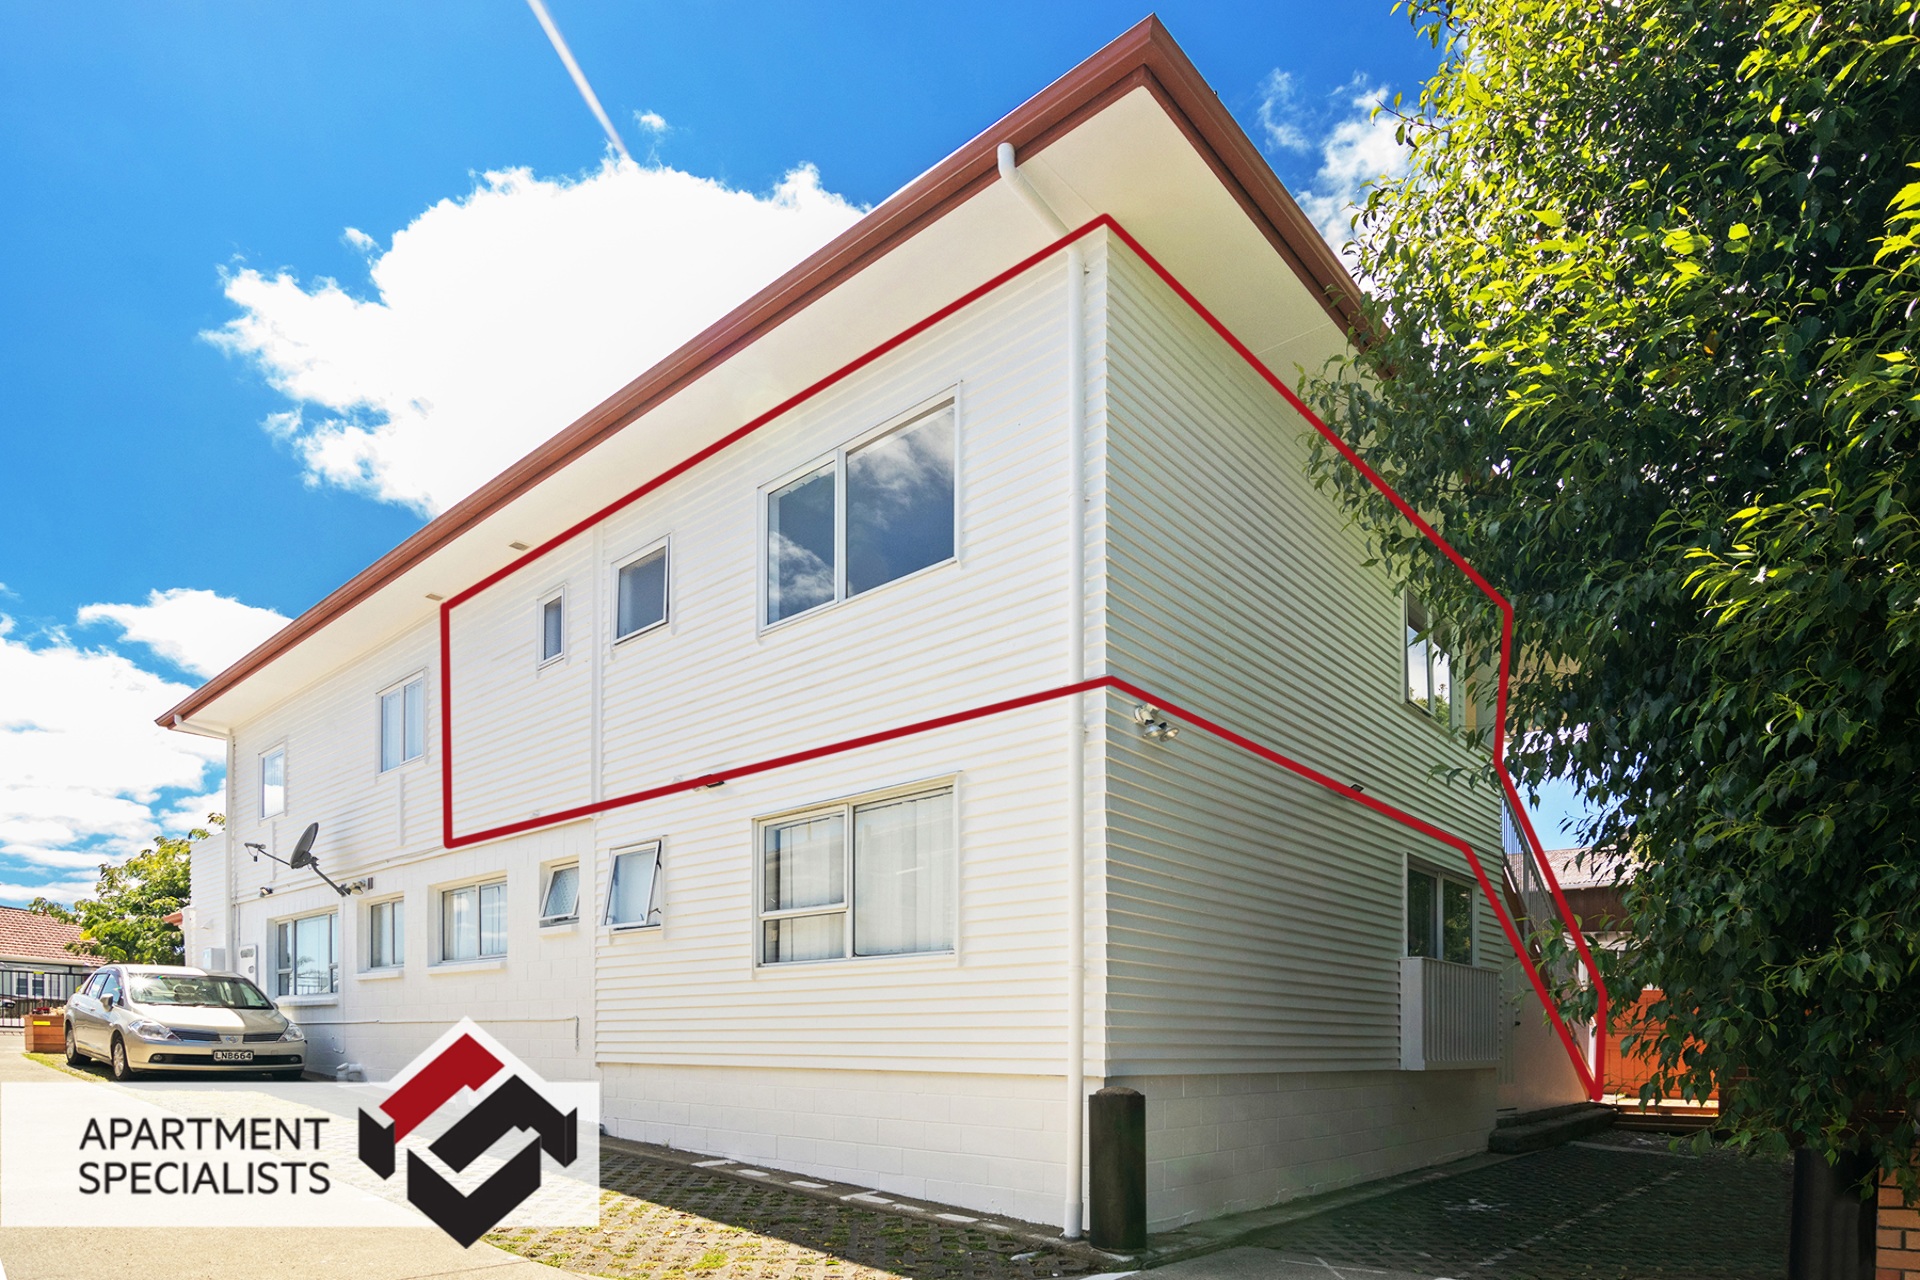 9 | 325 Mount Albert Road, Mount Roskill | Apartment Specialists